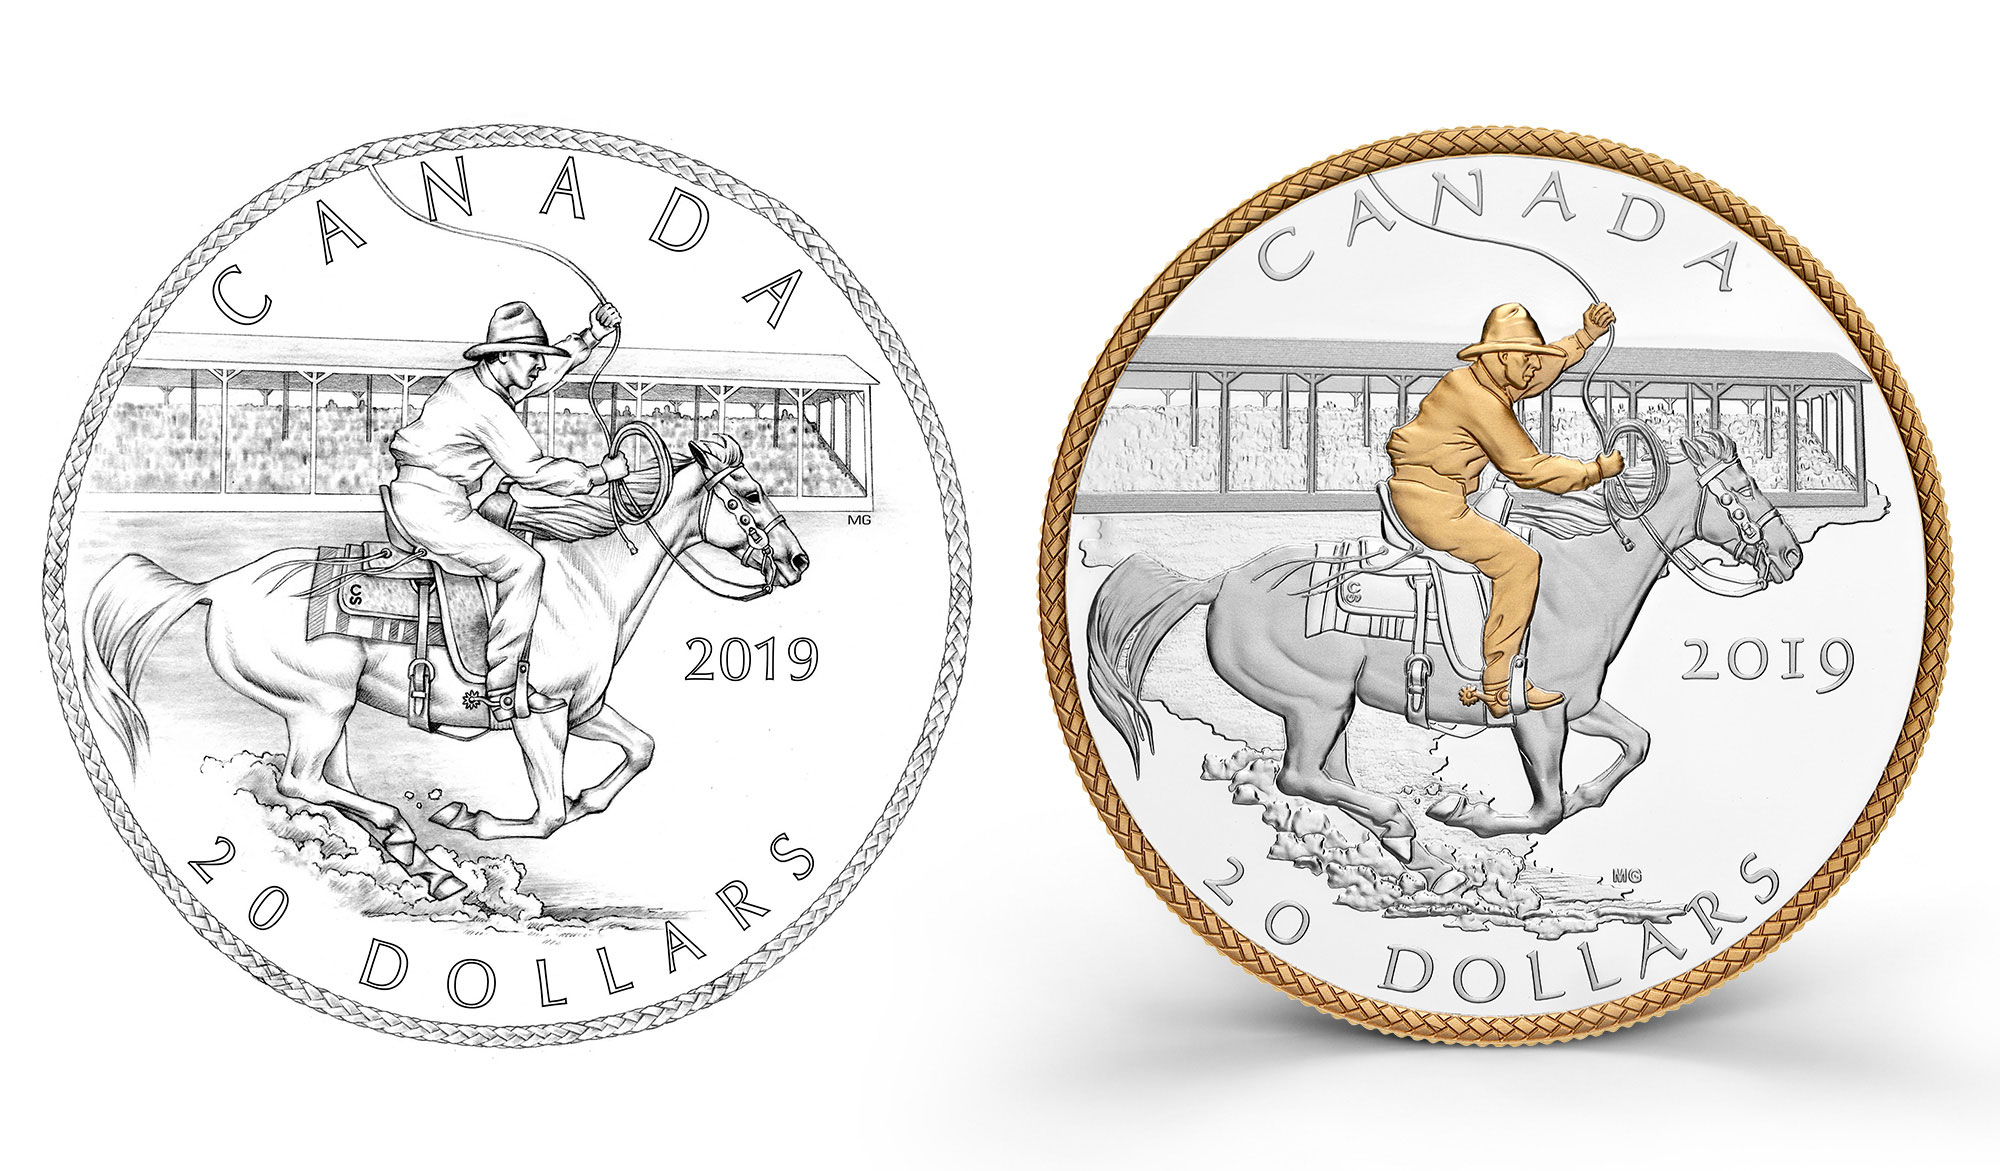 1919 Victory Stampede coin and artist sketch that was issued in 2019